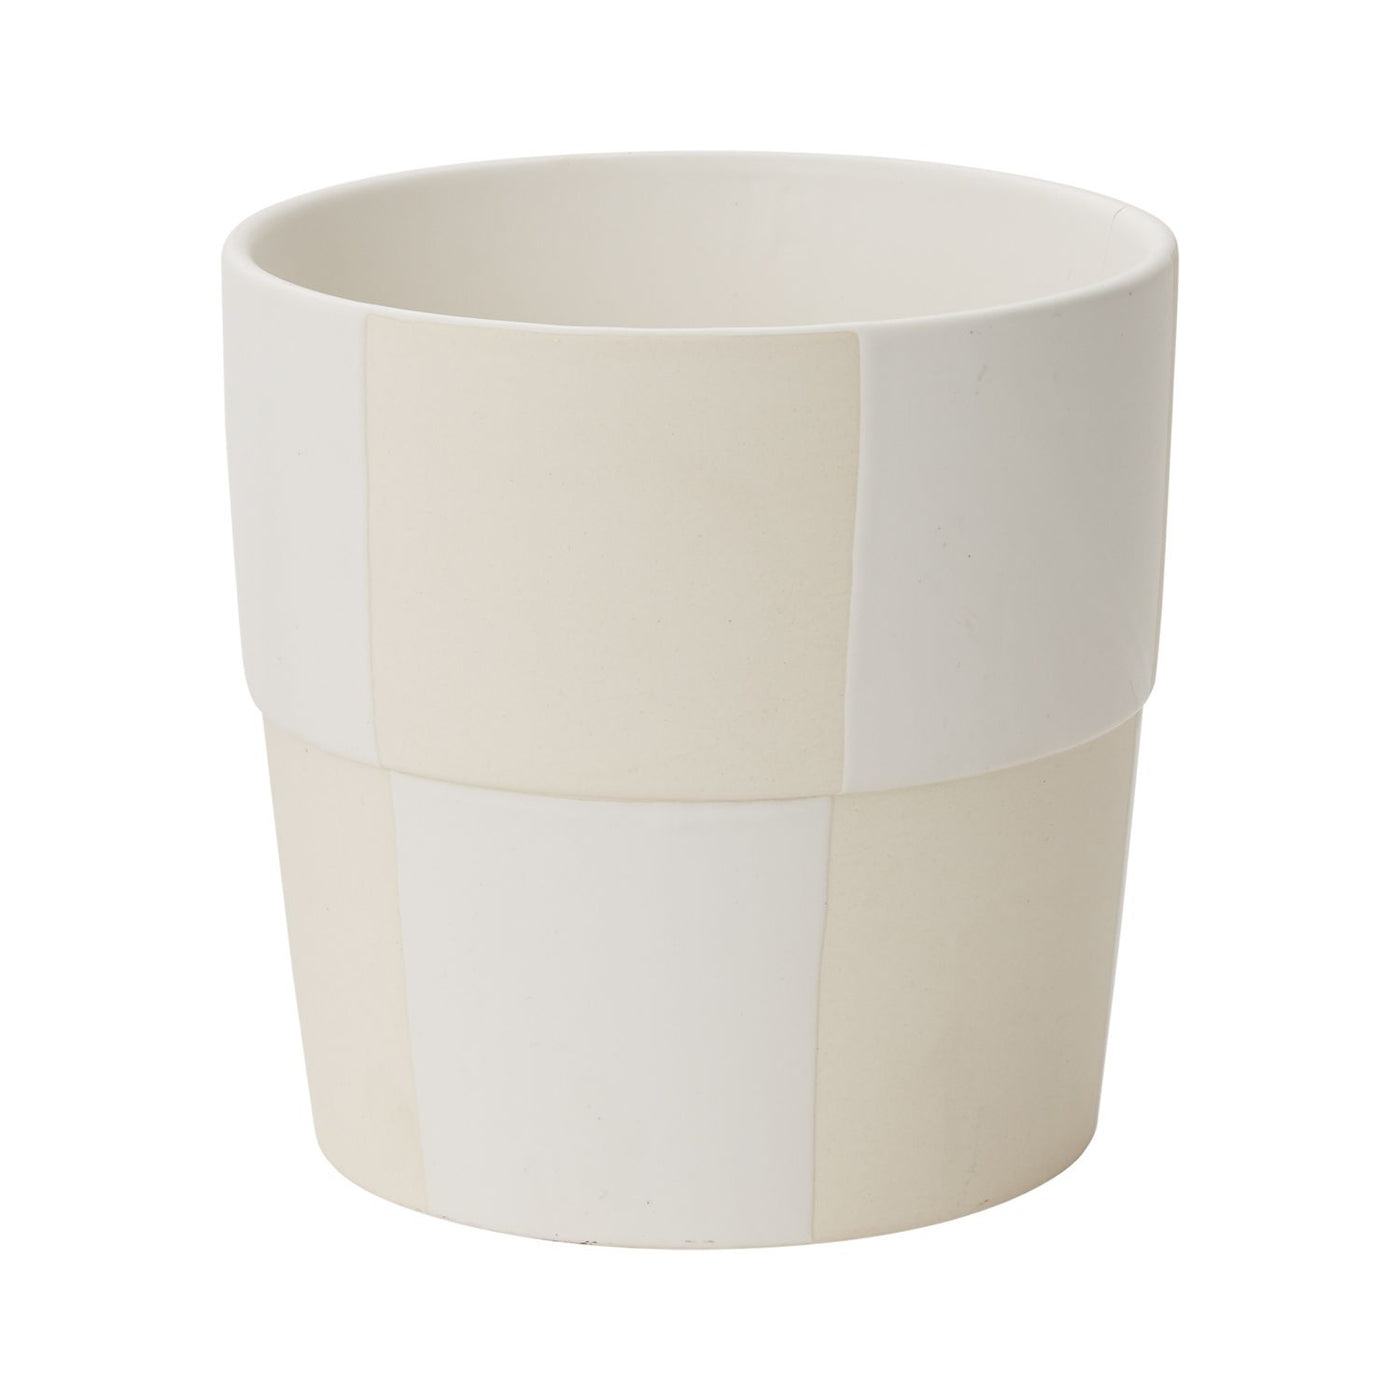 Off-White Checkerboard Pot, Large